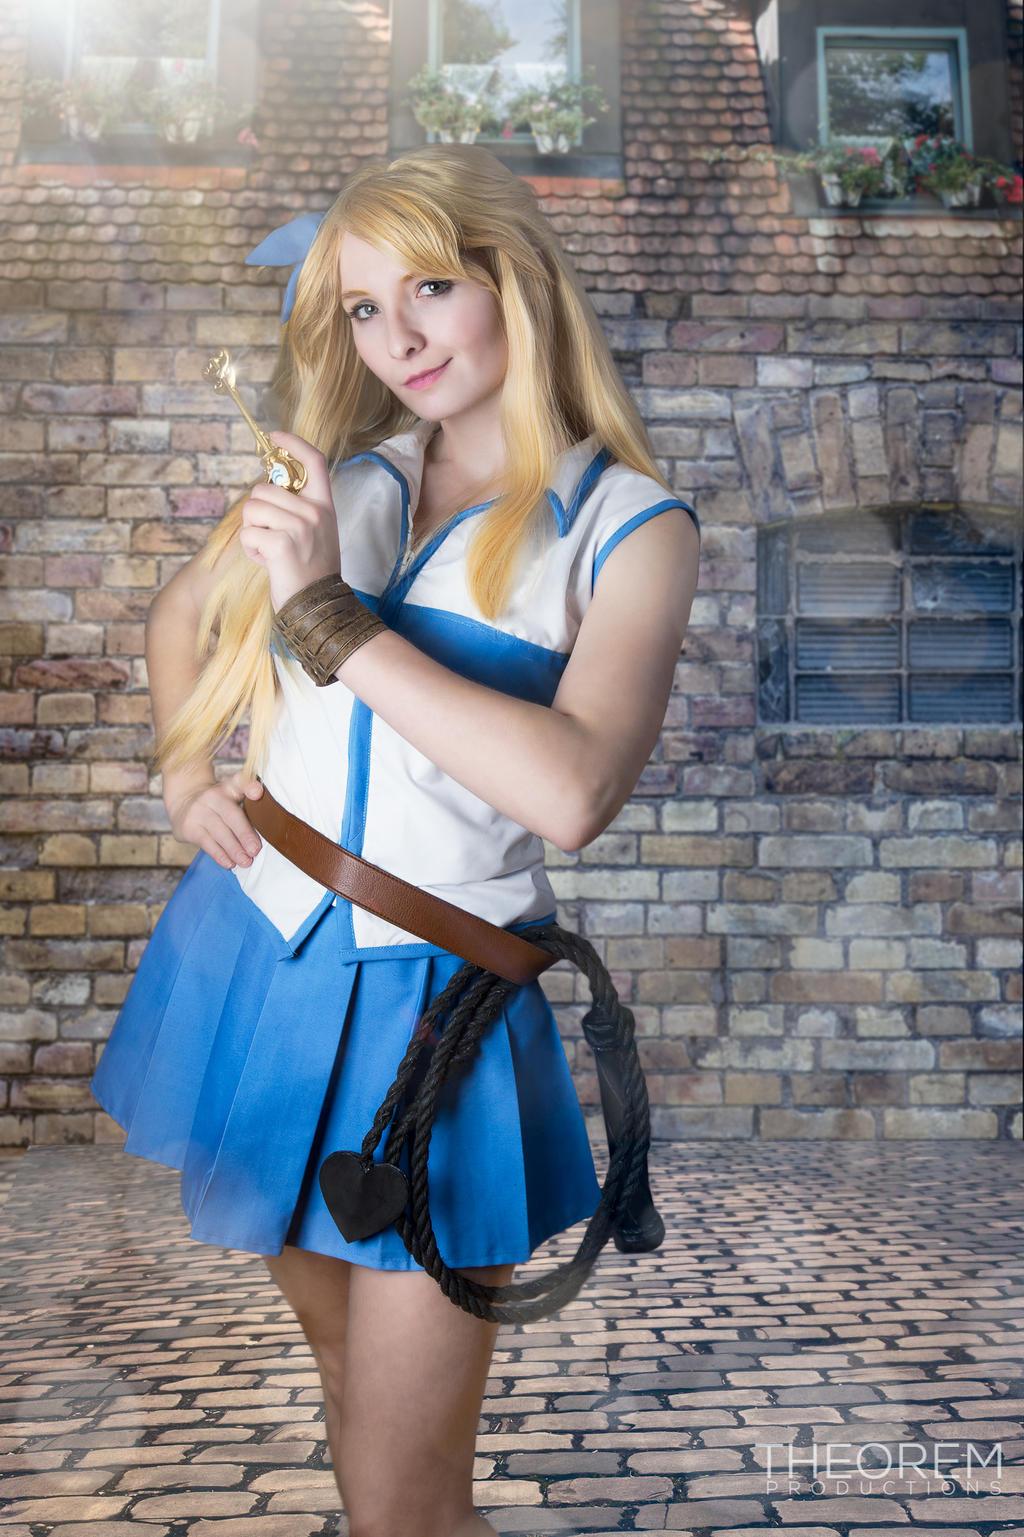 FAIRY TAIL: Lucy's Costume Fairy Tail Team A